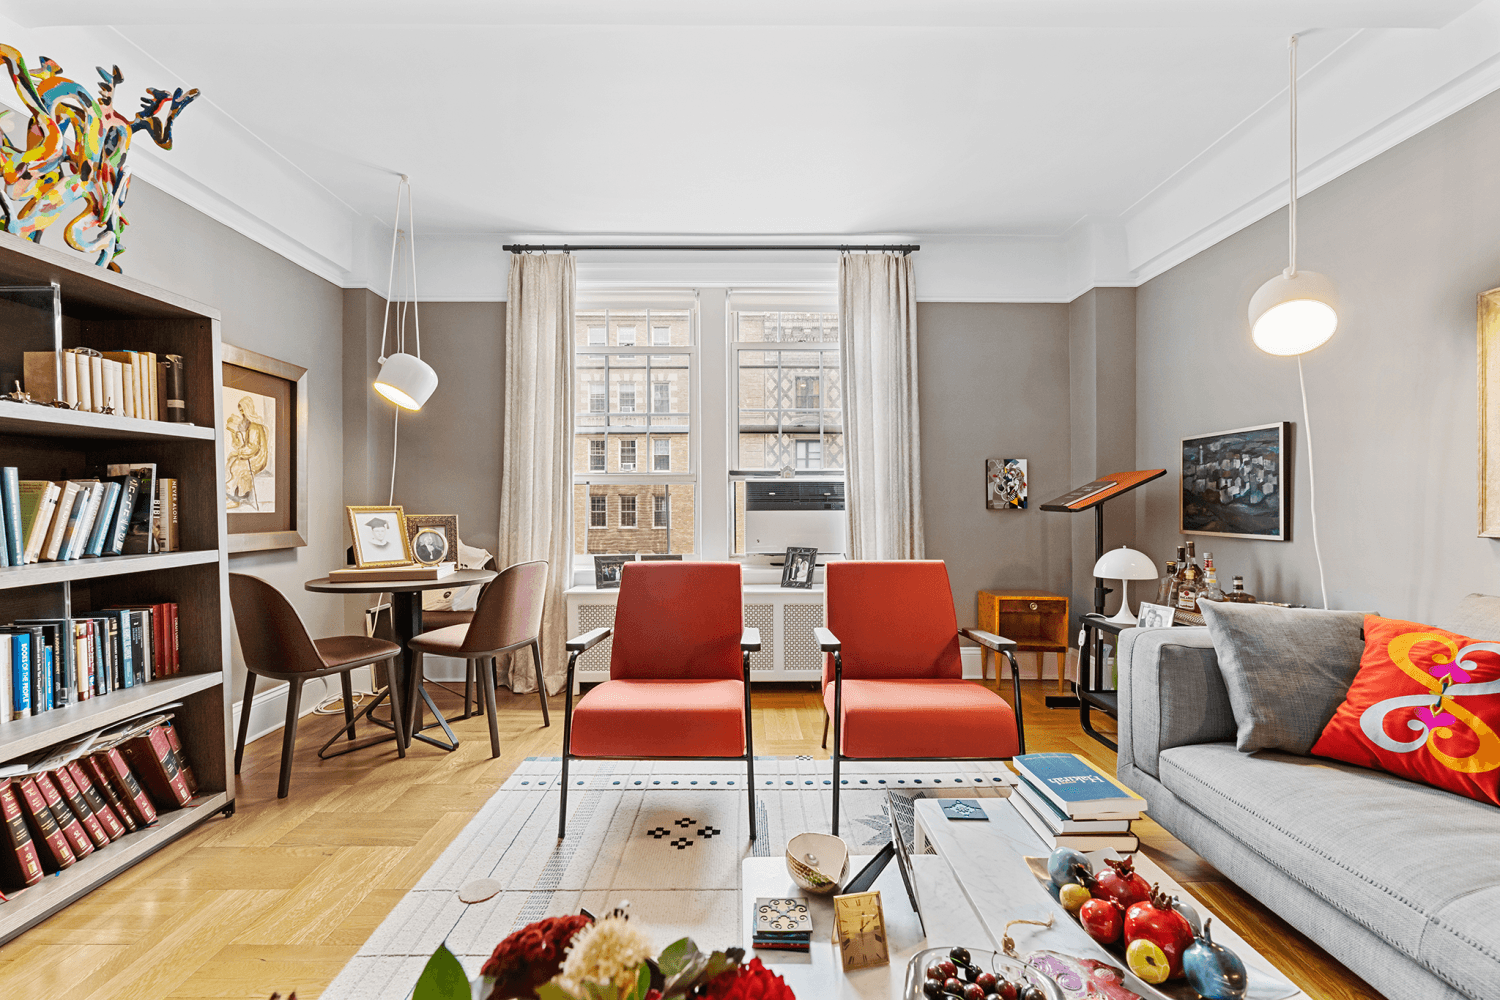 Newly renovated and very rare layout in this Prewar building.